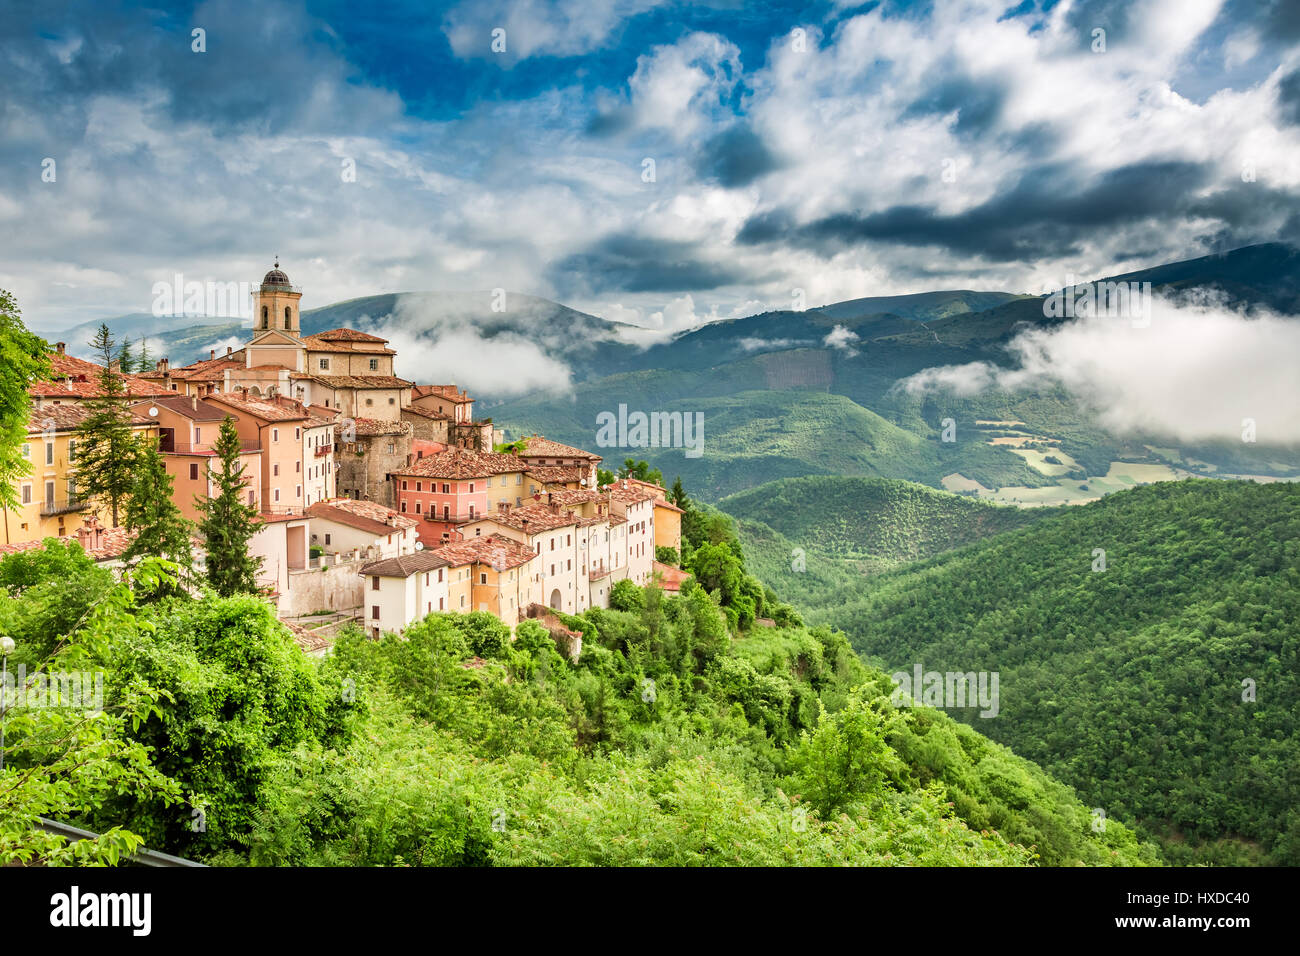 Wonderful small town on hill, Umbria, Italy Stock Photo